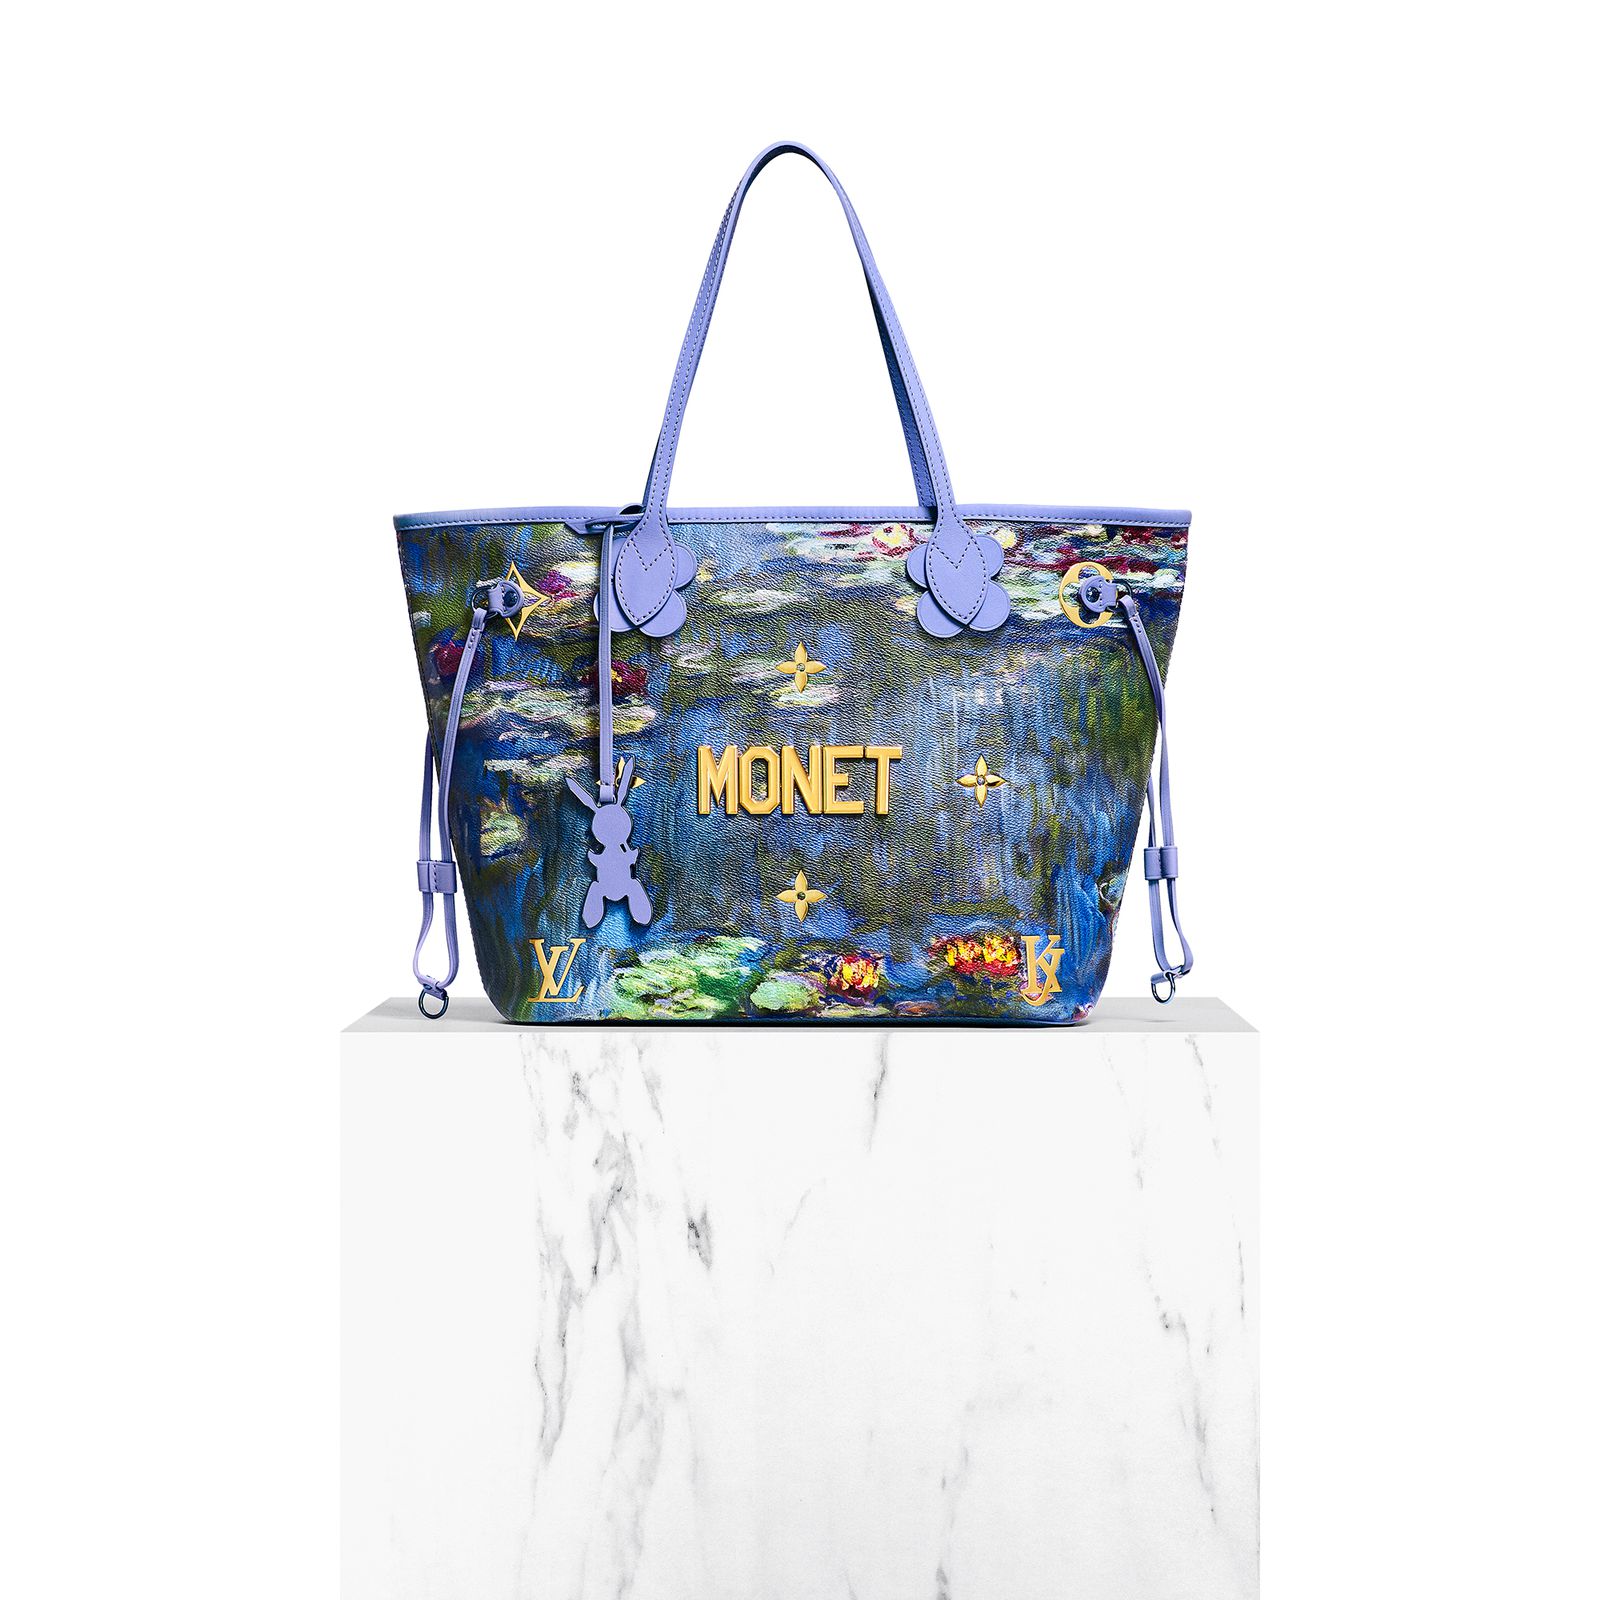 Louis Vuitton Masters: The second collaboration with Jeff Koons and a Monet Printed Handbag ...